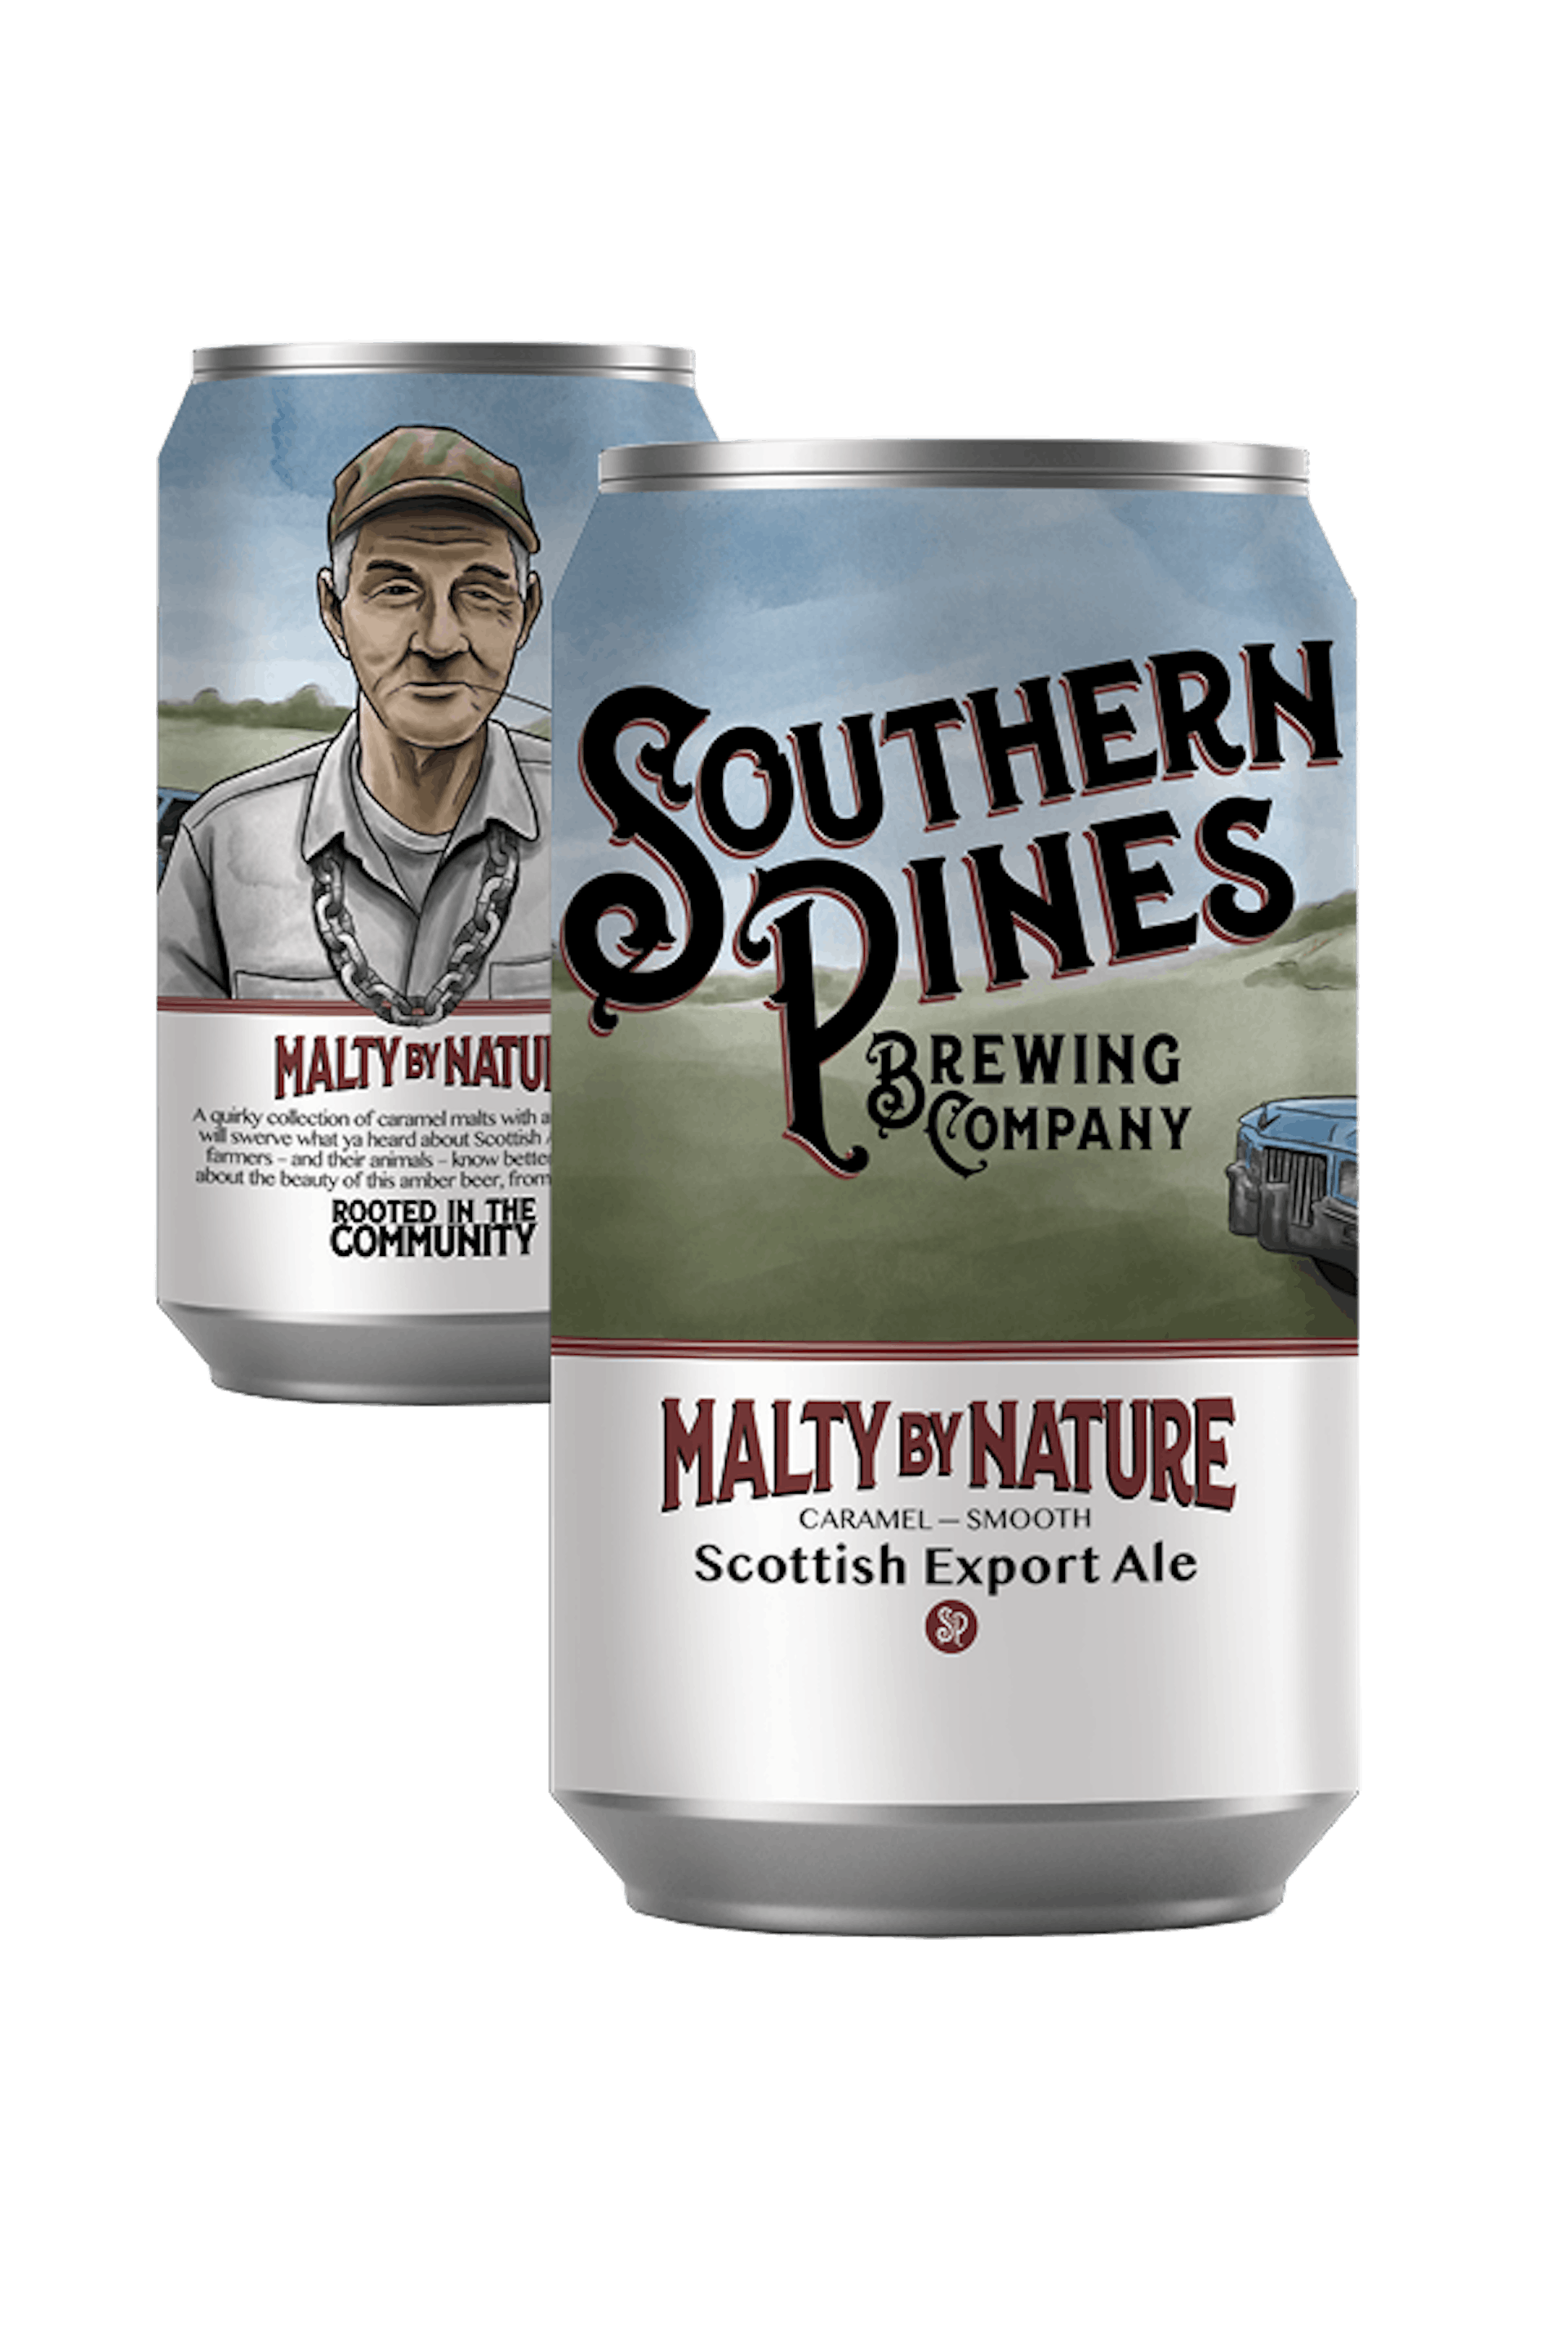 Malty by Nature